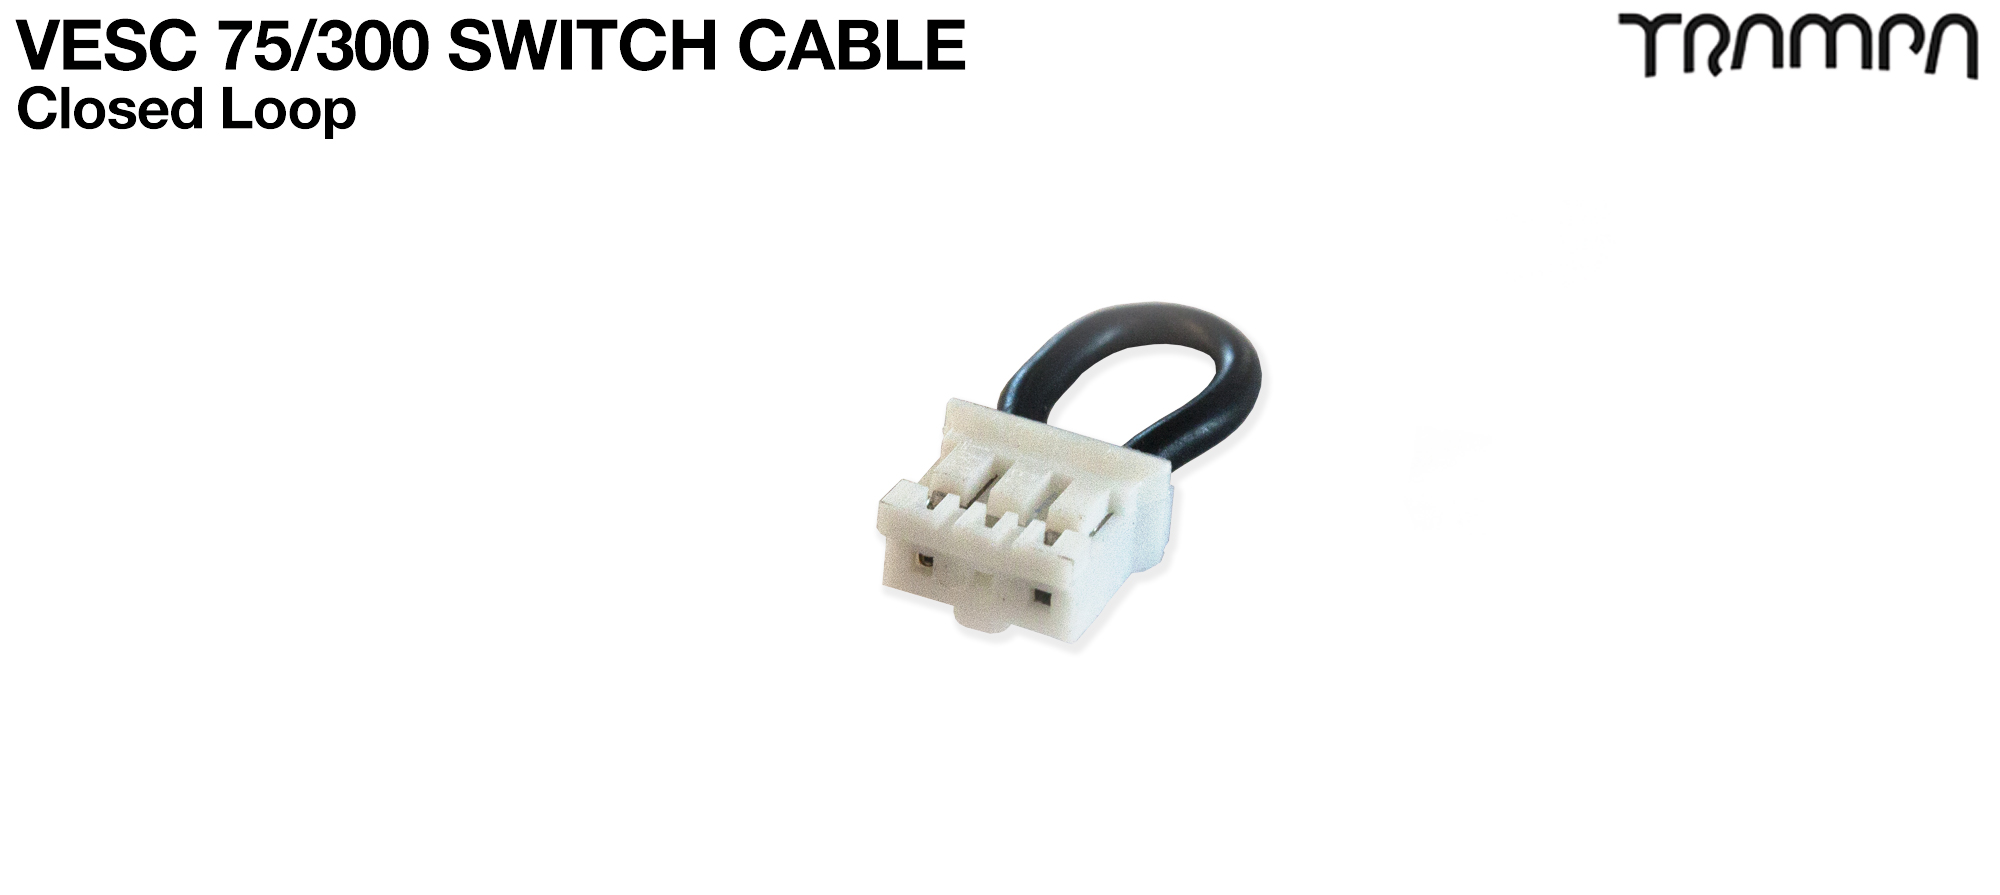 75/300 Switch Cable Loopkey - Closed